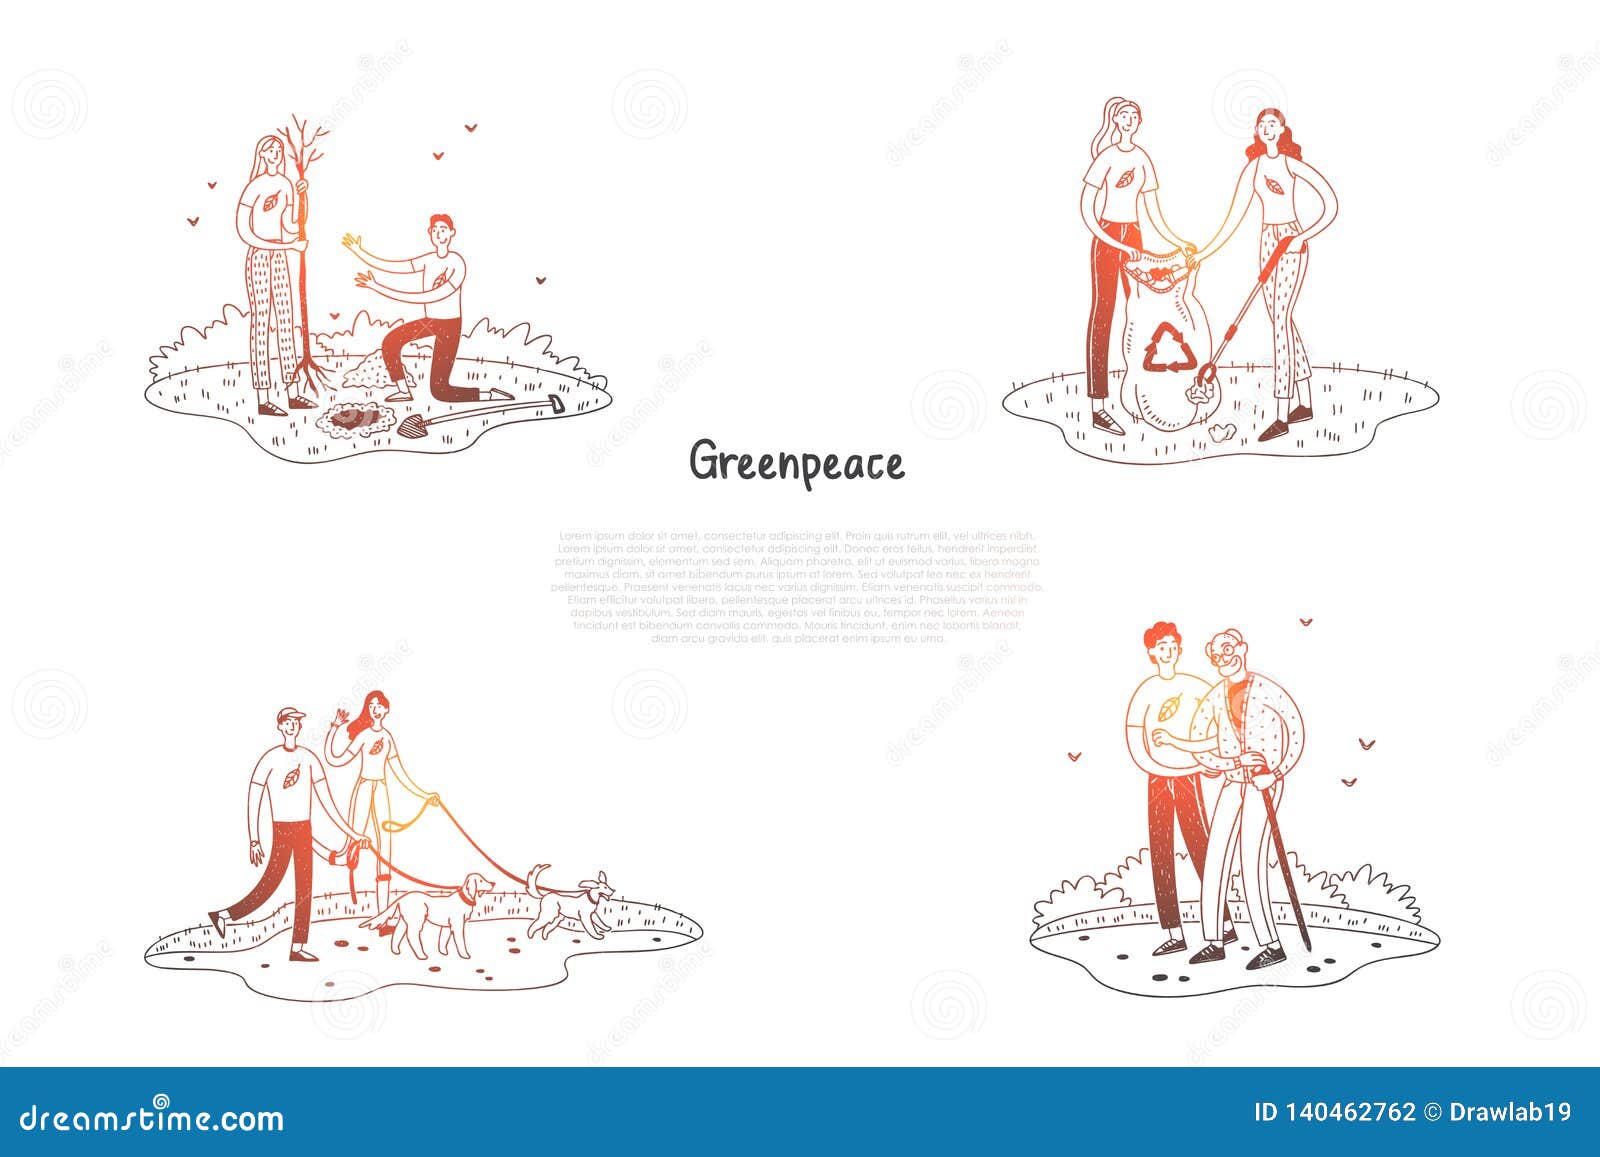 greenpeace - people collecting garbage, planting trees, helping elderly people, walking dogs  concept set